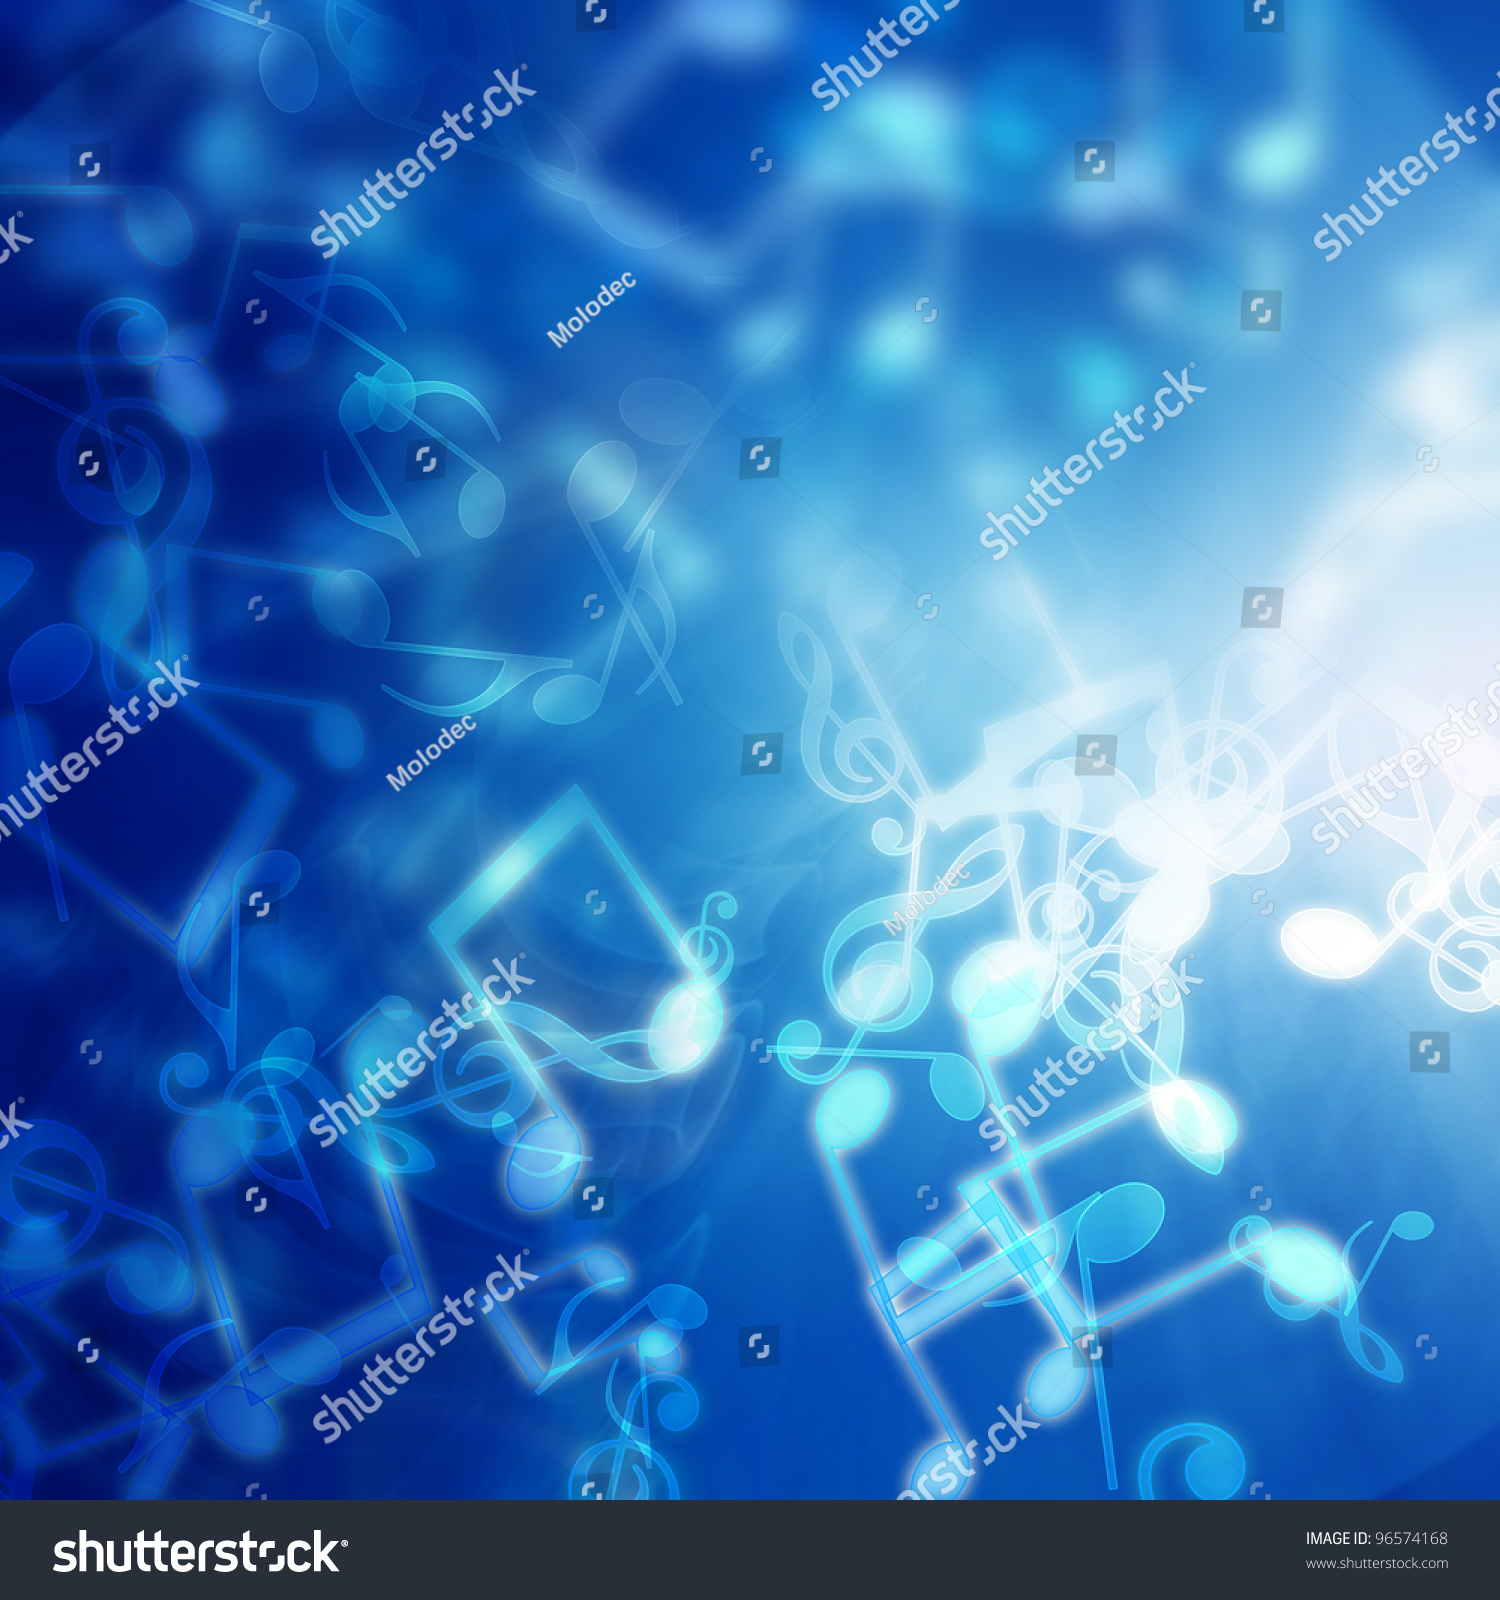 Blue Abstract Background Music Notes Stock Illustration 96574168